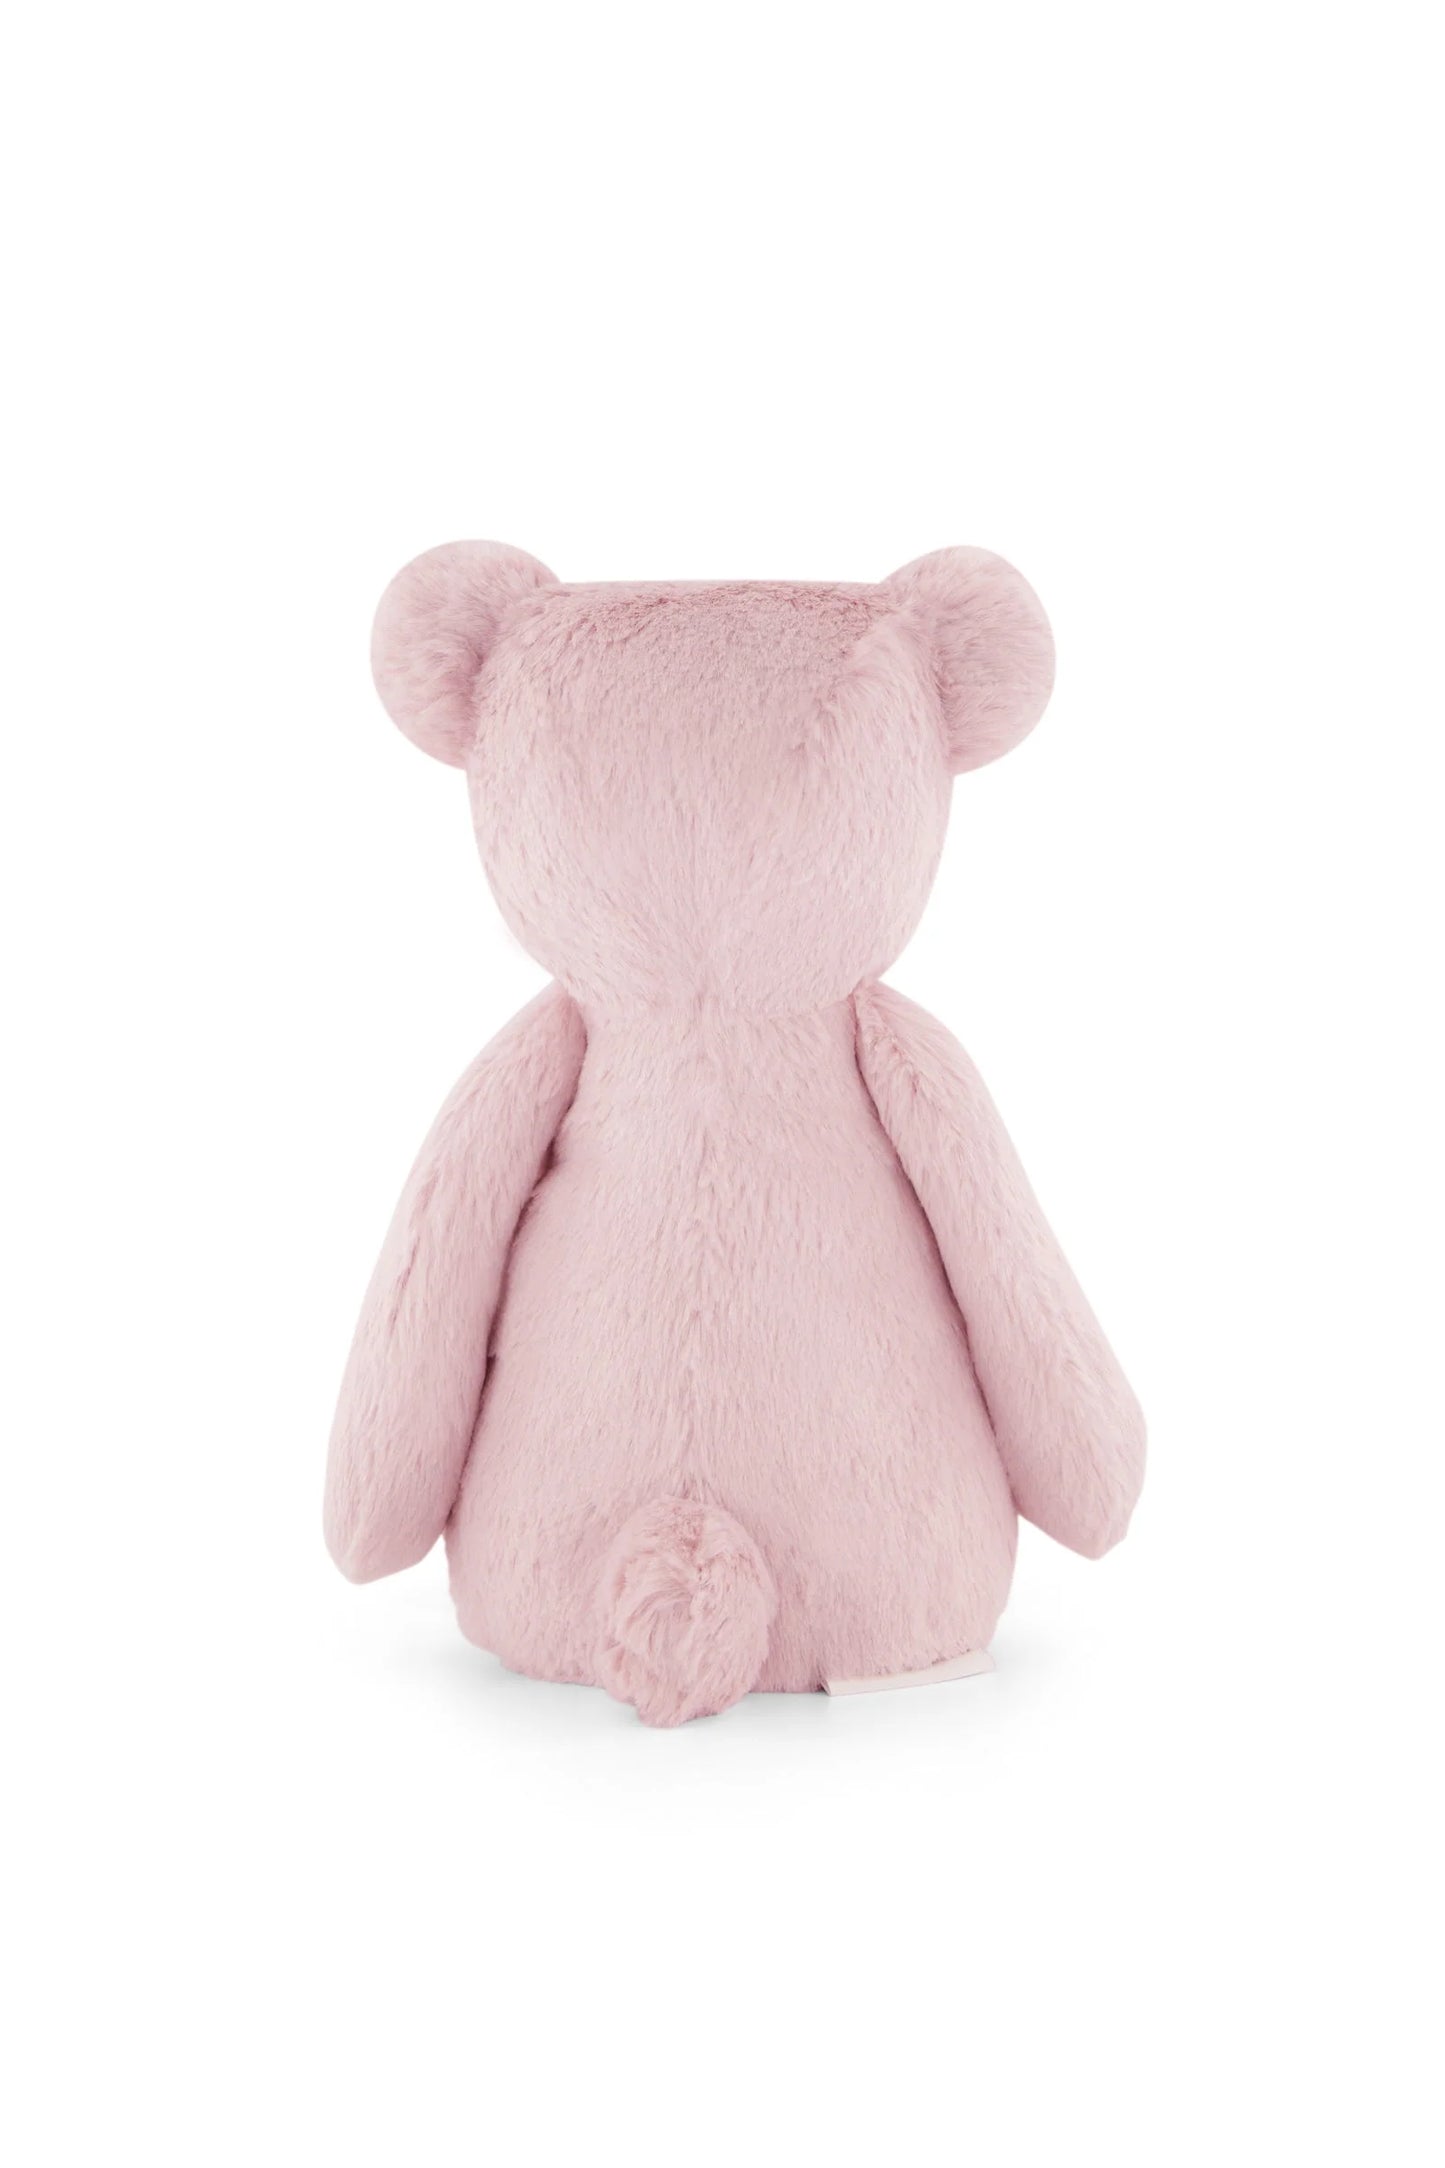 Jamie Kay Snuggle Bunnies - George the Bear (Powder Pink - Size Options Available)